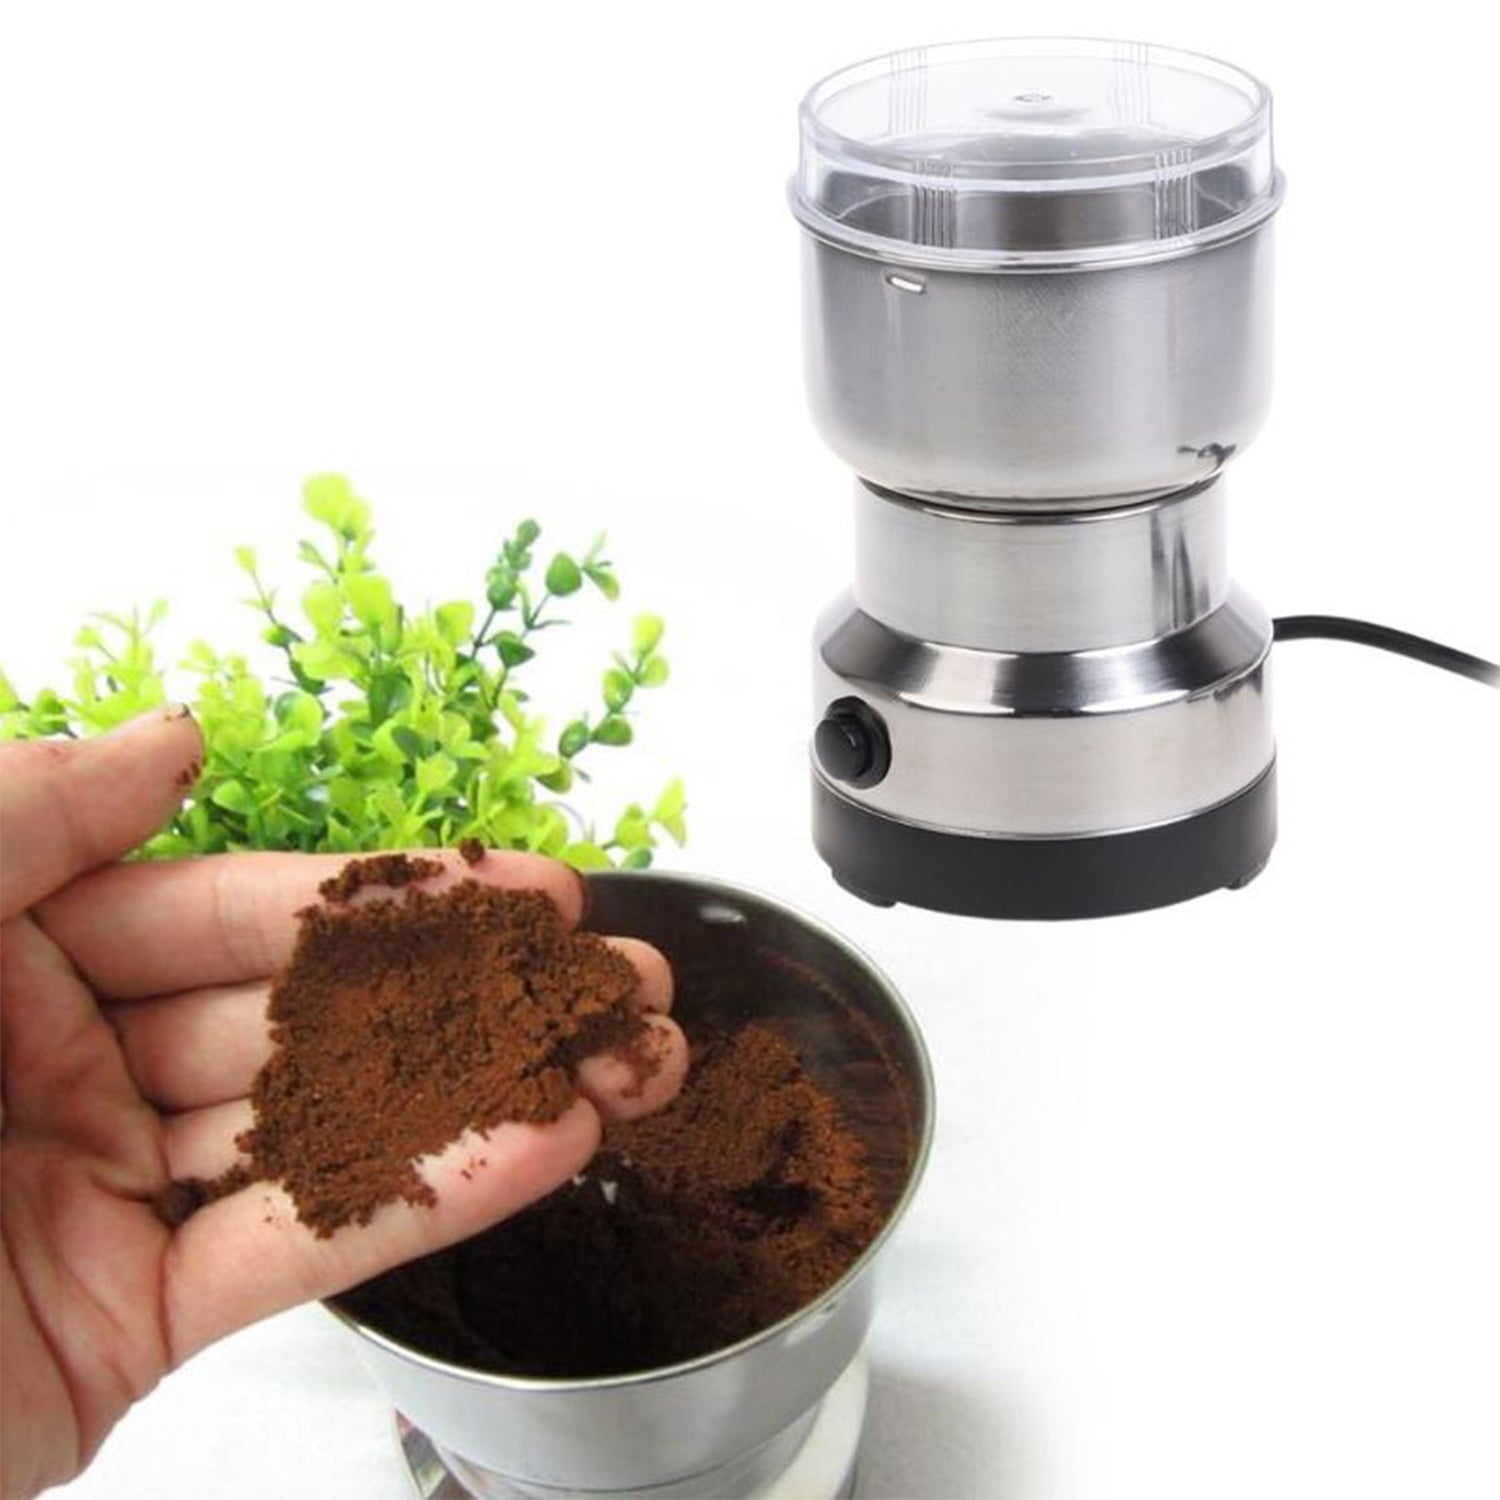 2515B Multi-Functional Electric Stainless Steel Herbs Spices Nuts Grain Grinder with Stainless Steel Bowl, Portable Coffee Bean Seasonings Spices Mill Powder Machine Grinder Machine for Home and Office